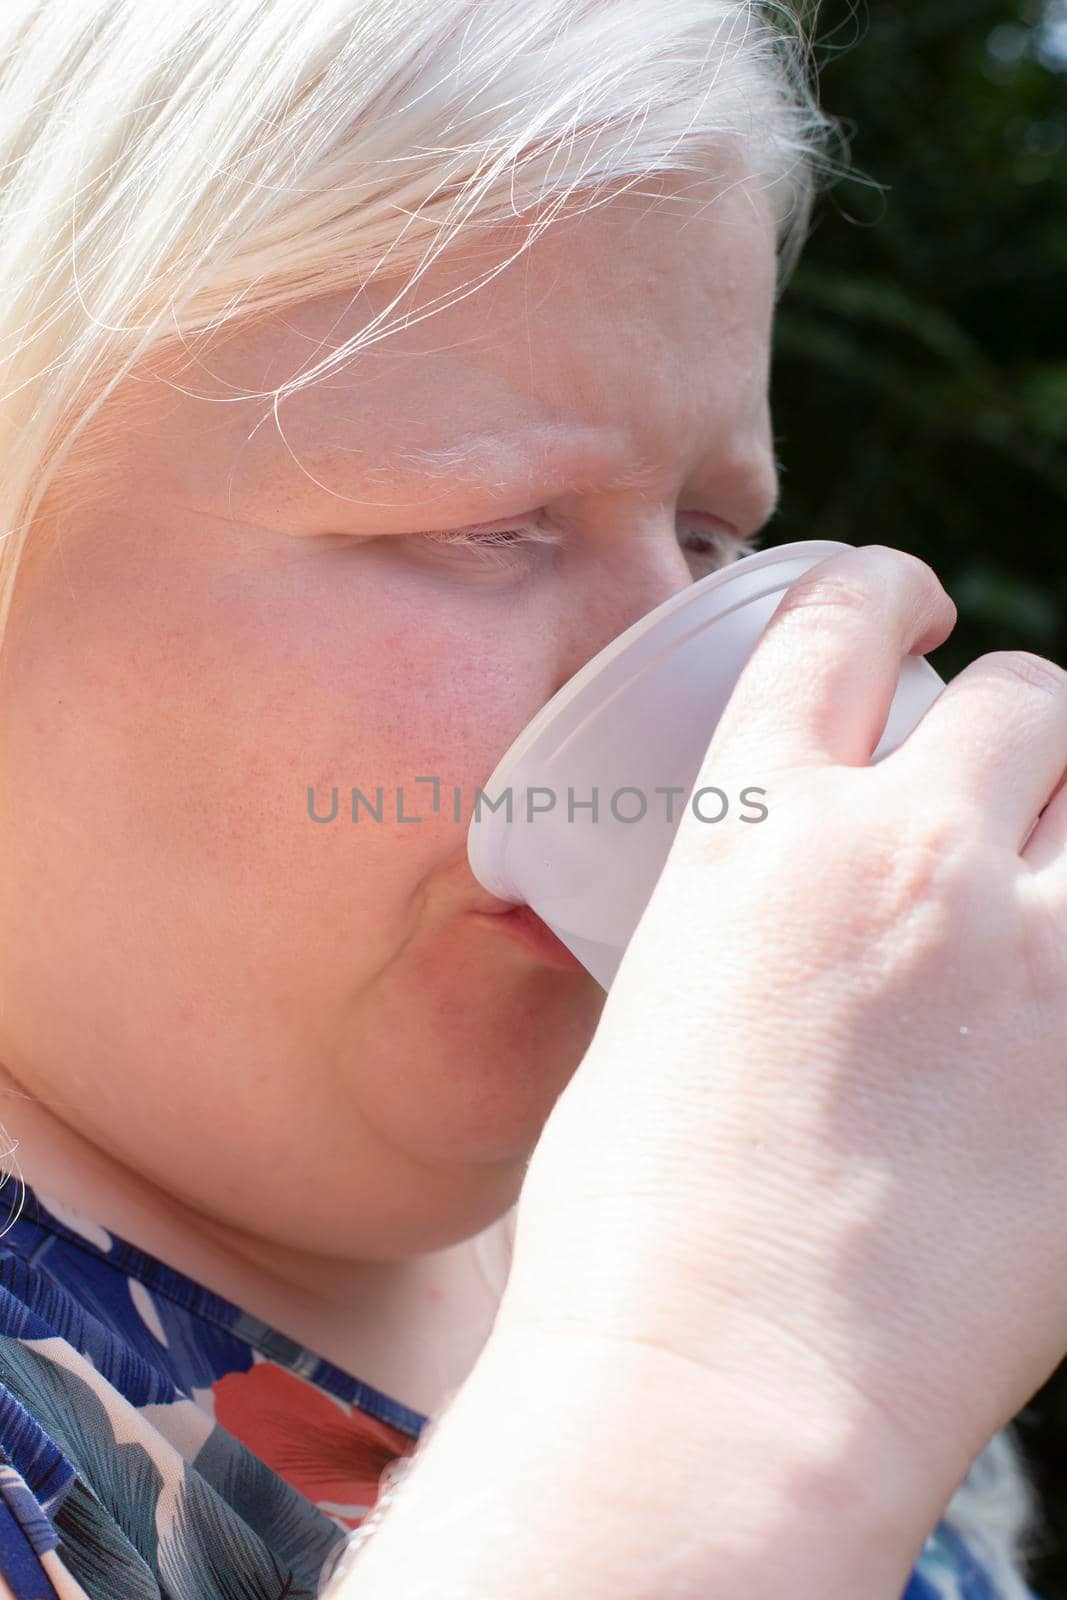 Albino woman enjoying a glass of water in a plastic cup